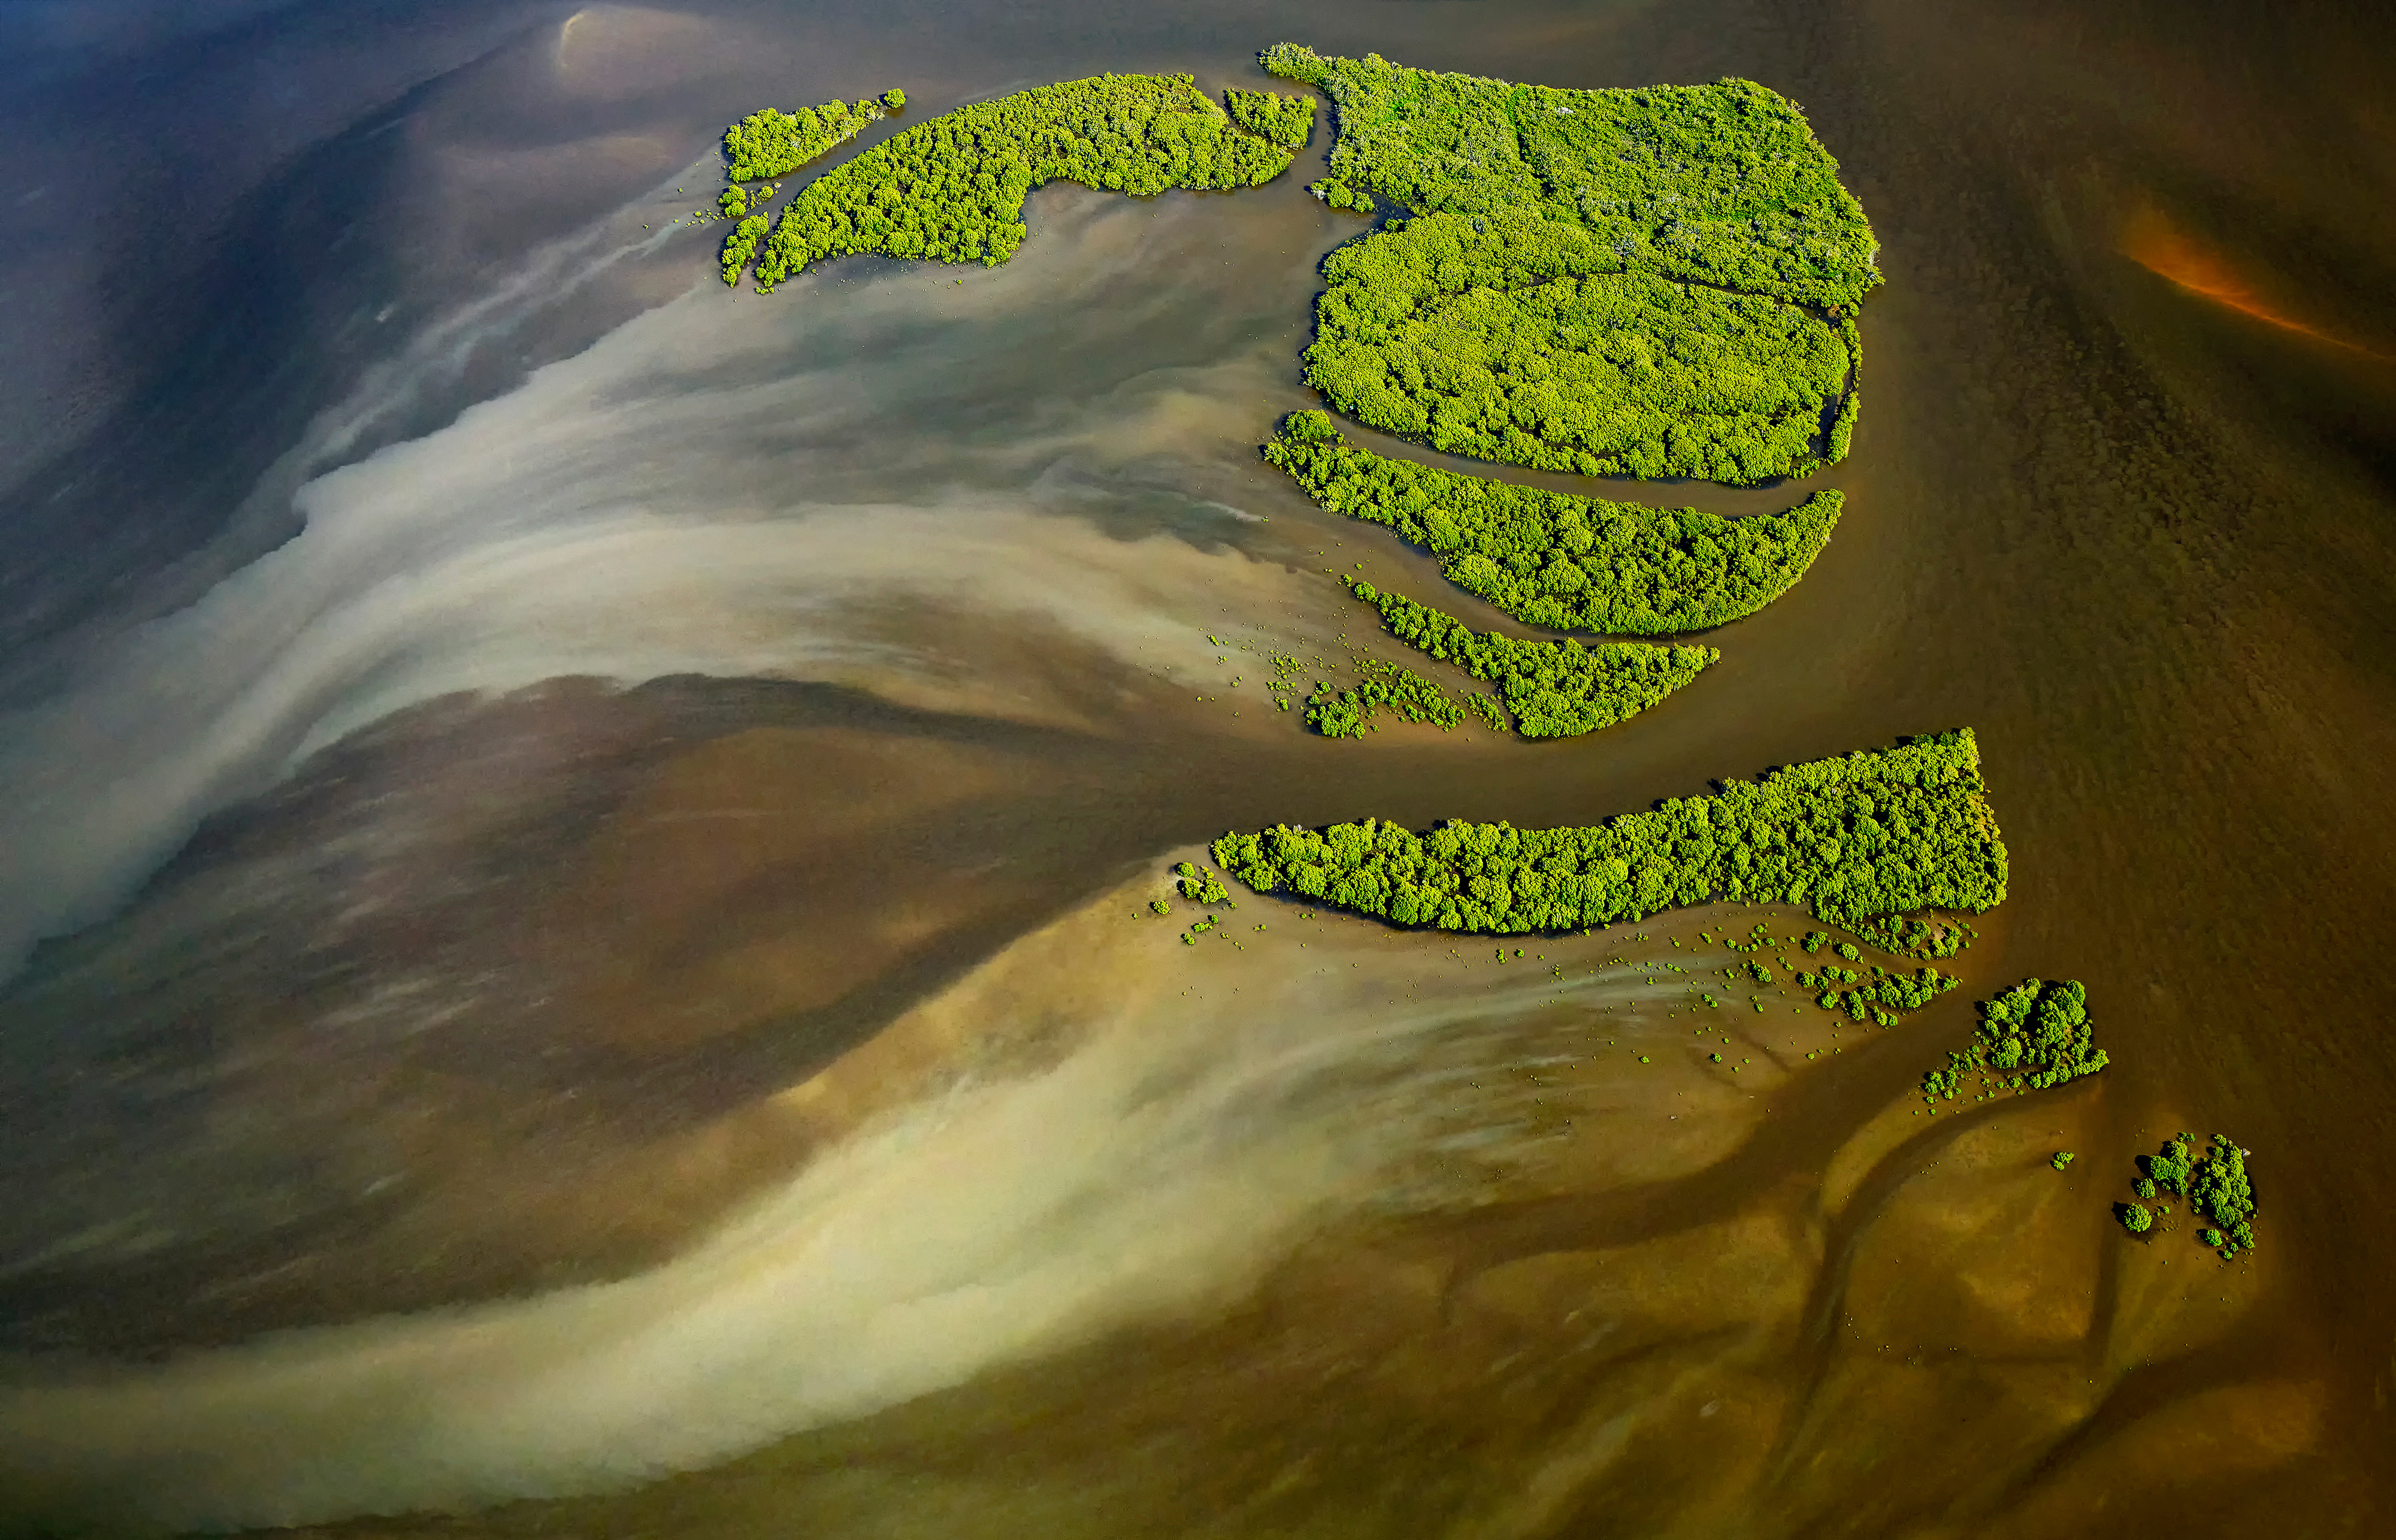 An aerial view taken from a helicopter of mangroves in an estuary at Yamba, New South Wales, Australia.